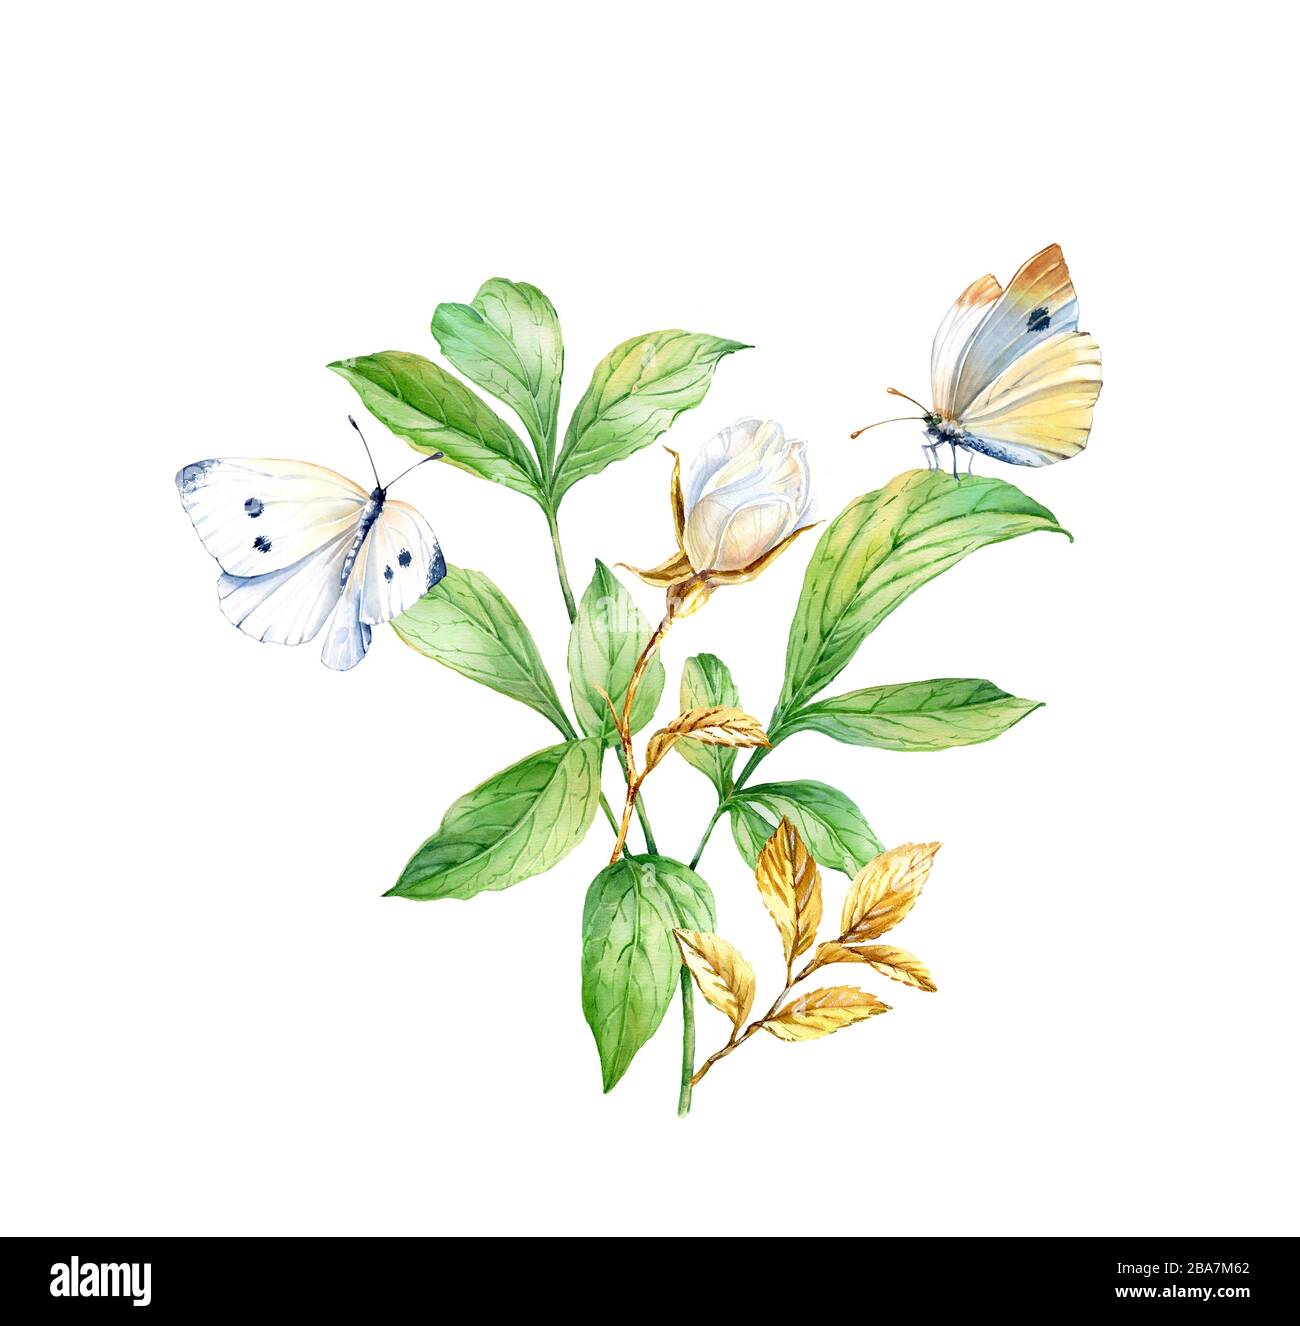 Watercolor leaves with white butterflies. Realistic plant isolated on white. Golden rose branch. Botanical floral illustration with insects Stock Photo